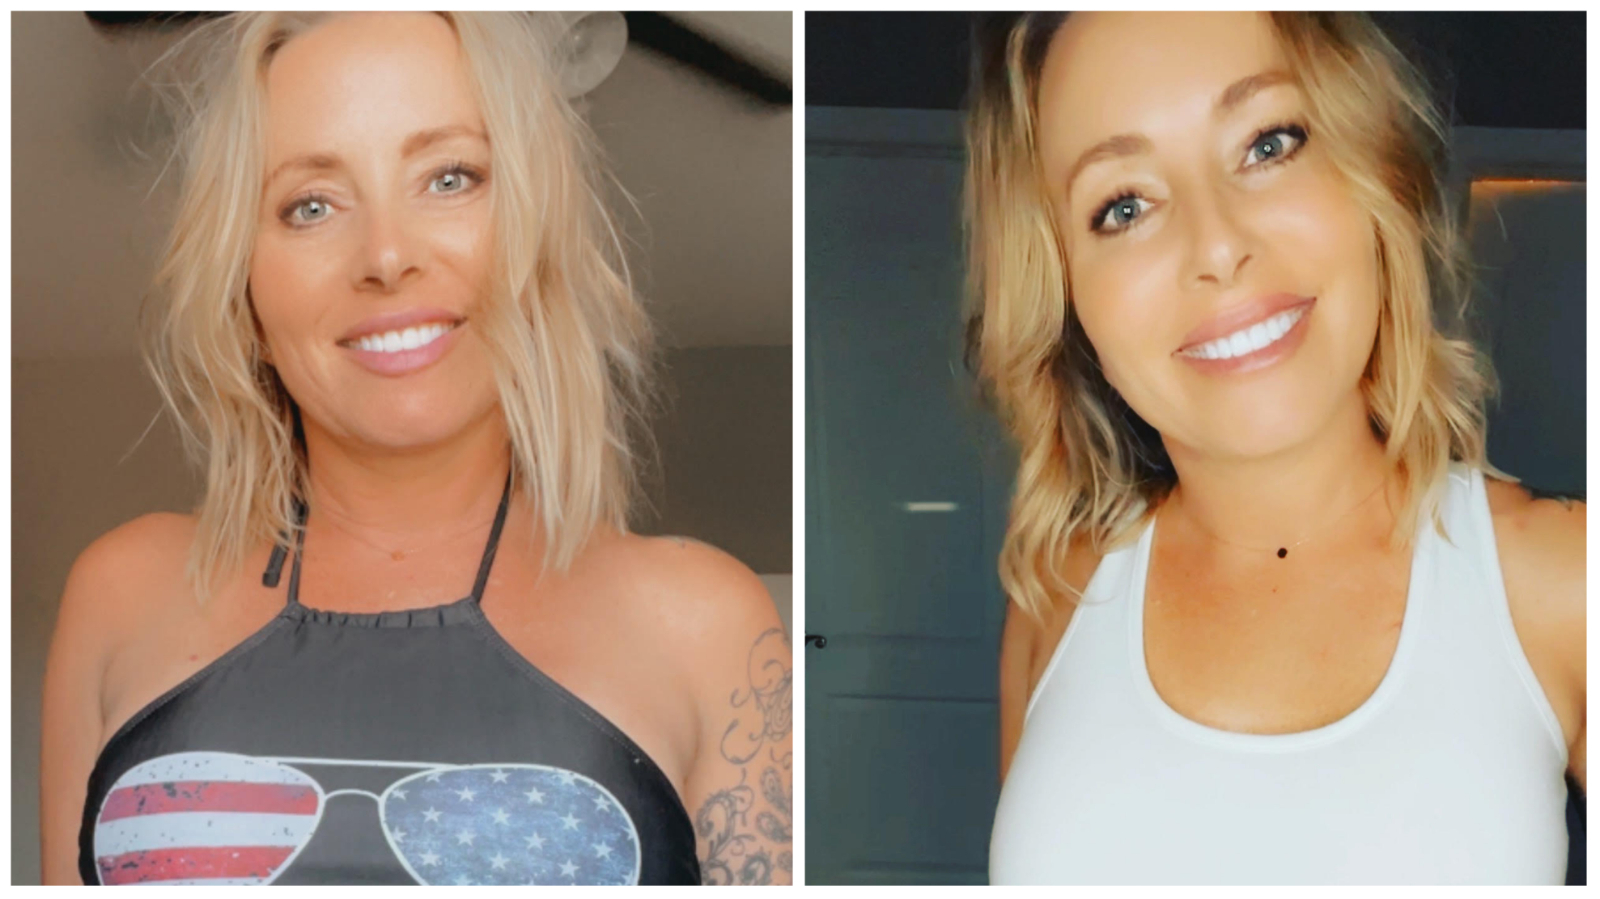 Regional Small-Town Mom Ignores The Haters While Making Big Money On Adult Site “OnlyFans” Your Wyoming News Source photo